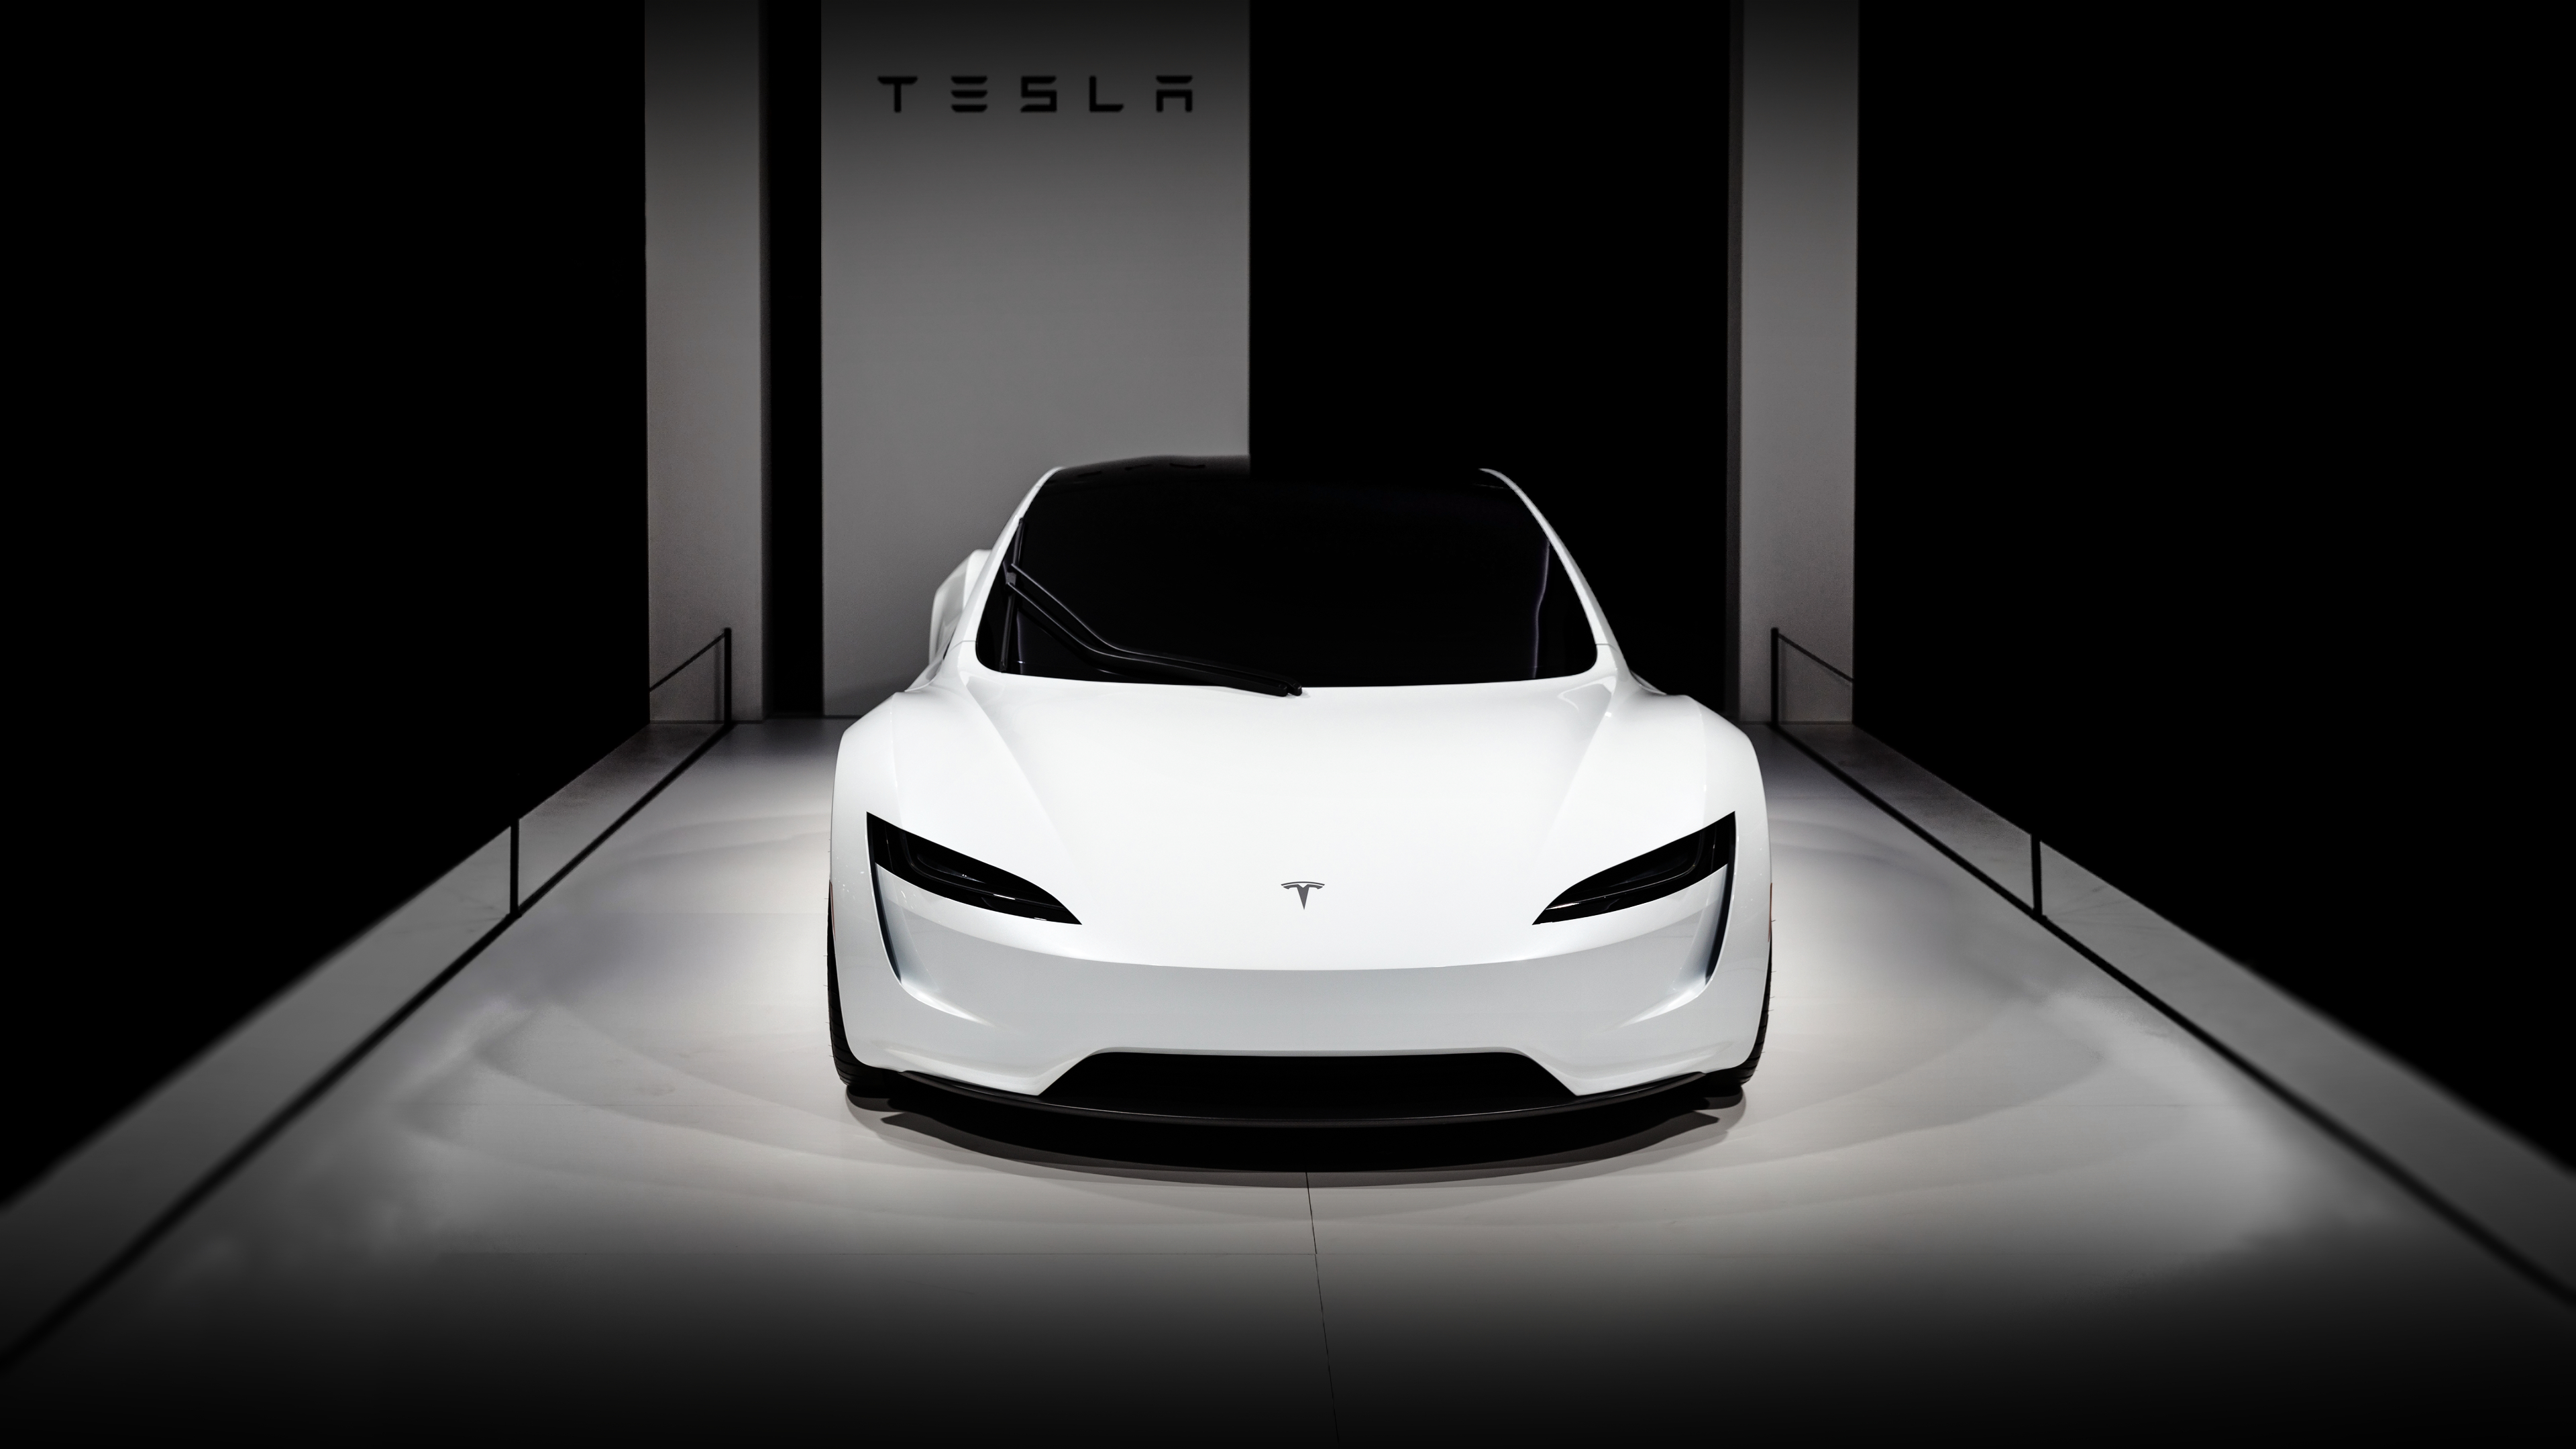 3840x2160 Wanted a Tesla Roadster wallpaper so I made this from a Grand Basel photo. In 4k, enjoy. : r/teslamotors